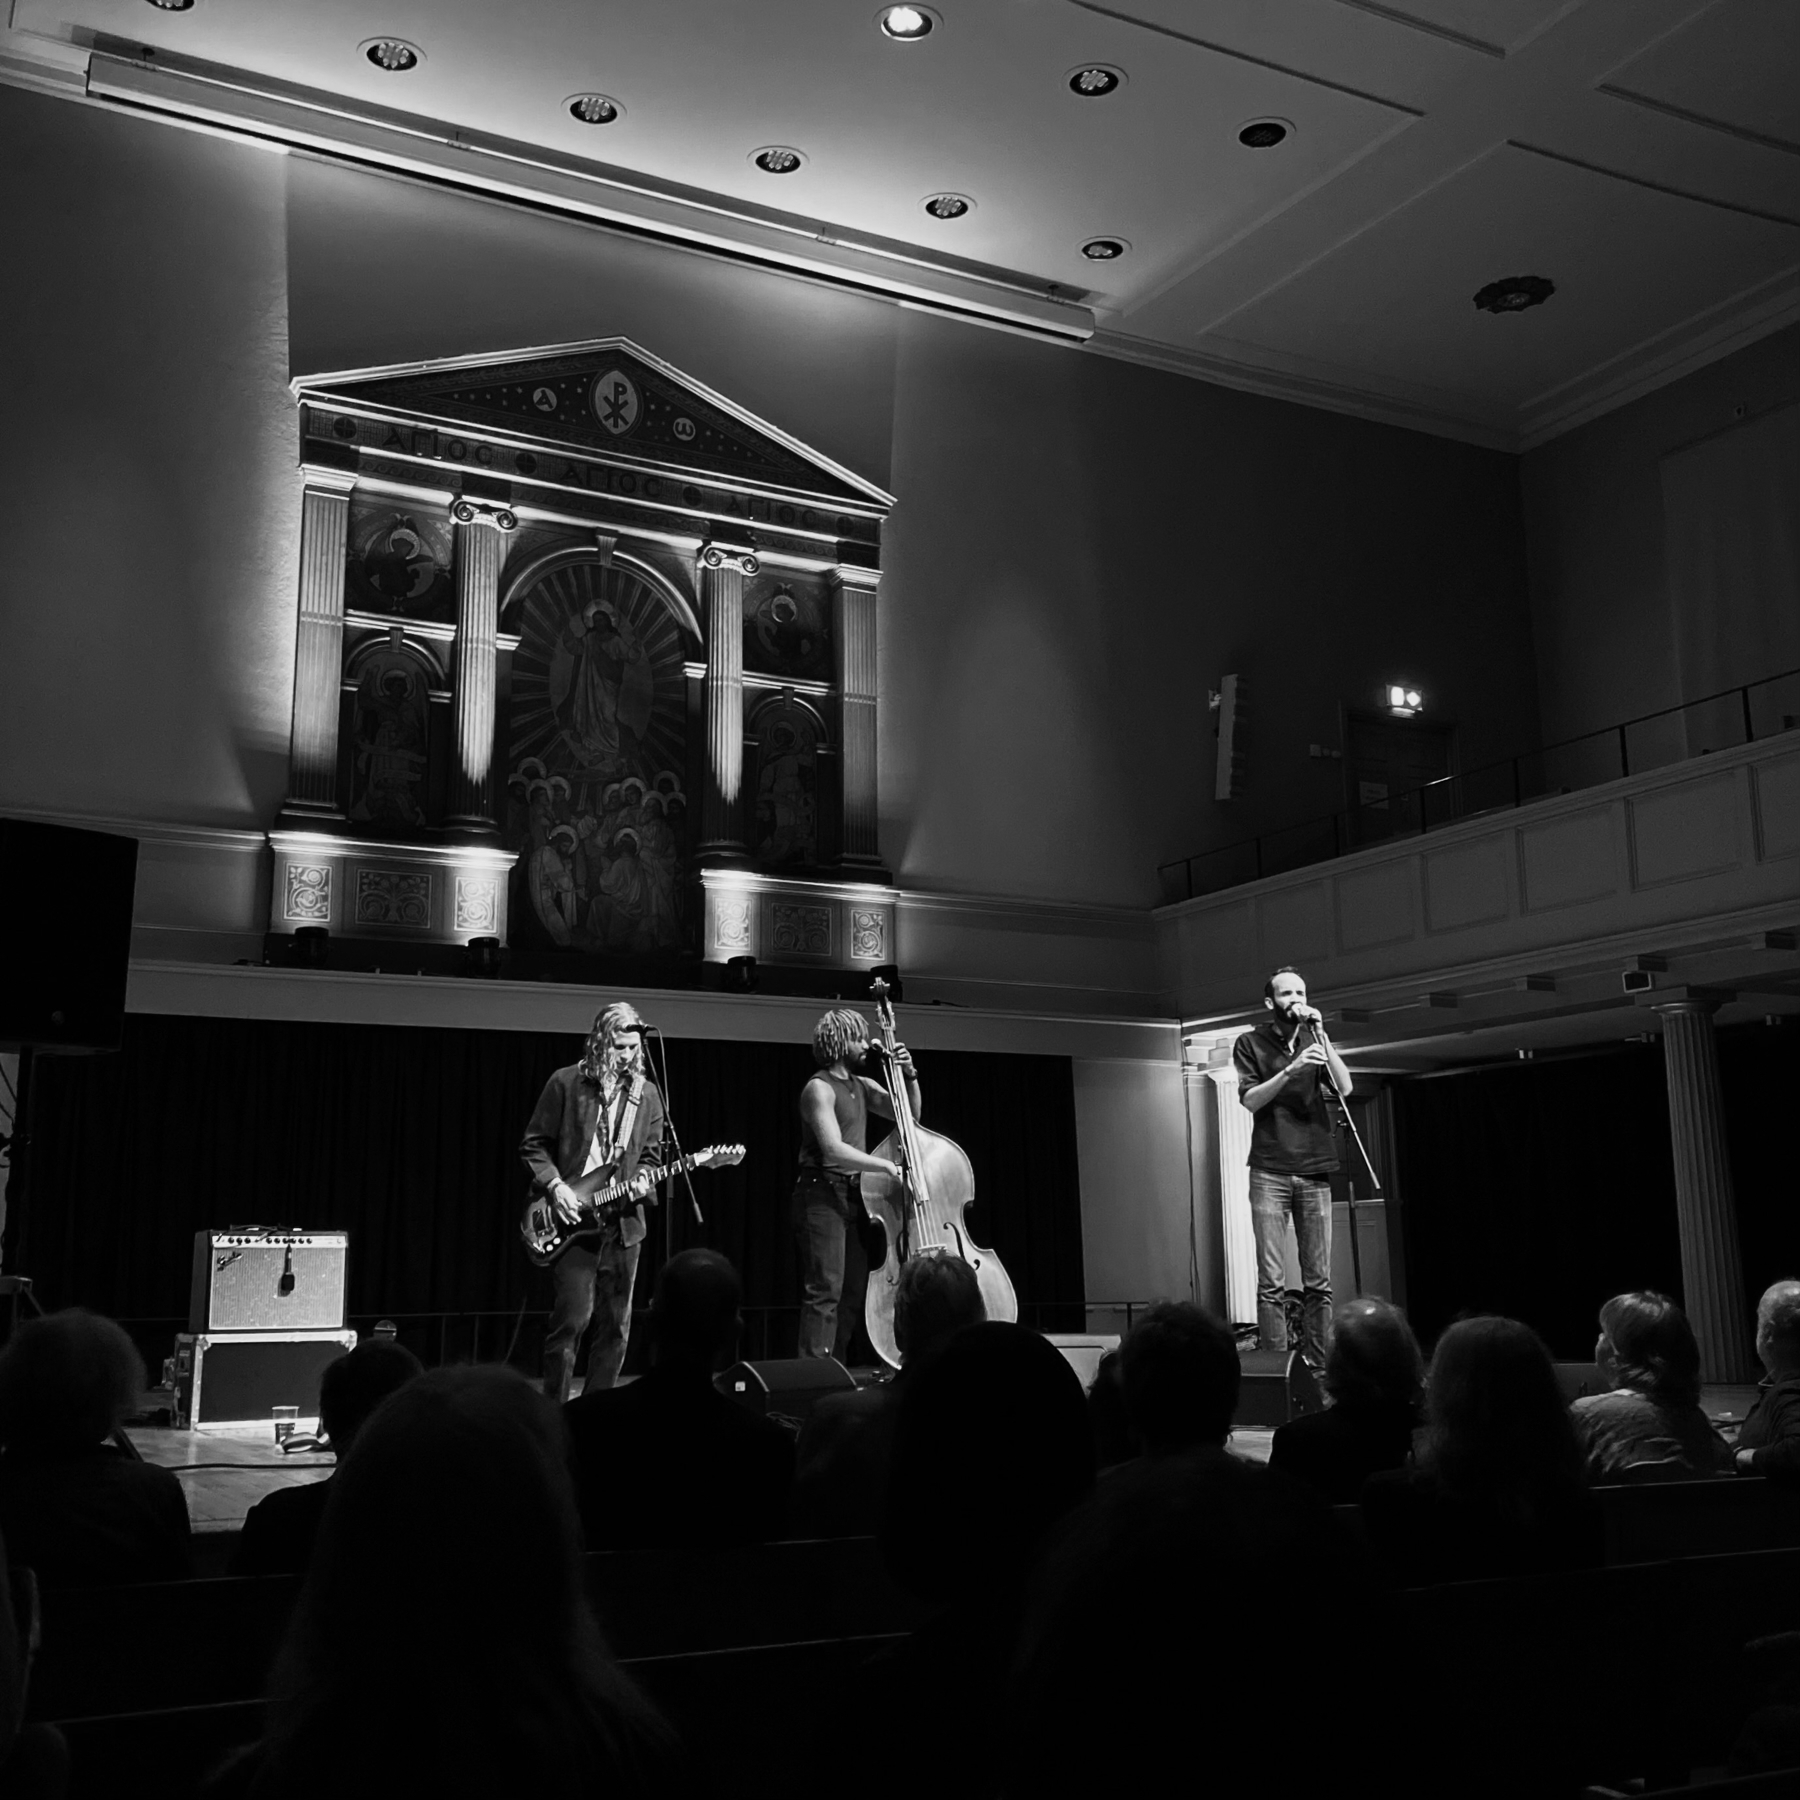 A black and white photo of a live music performance featuring three musicians. The setting includes an ornate stage backdrop with classical architectural details. The band consists of one person playing an electric guitar, another playing an upright bass, and a third singing 